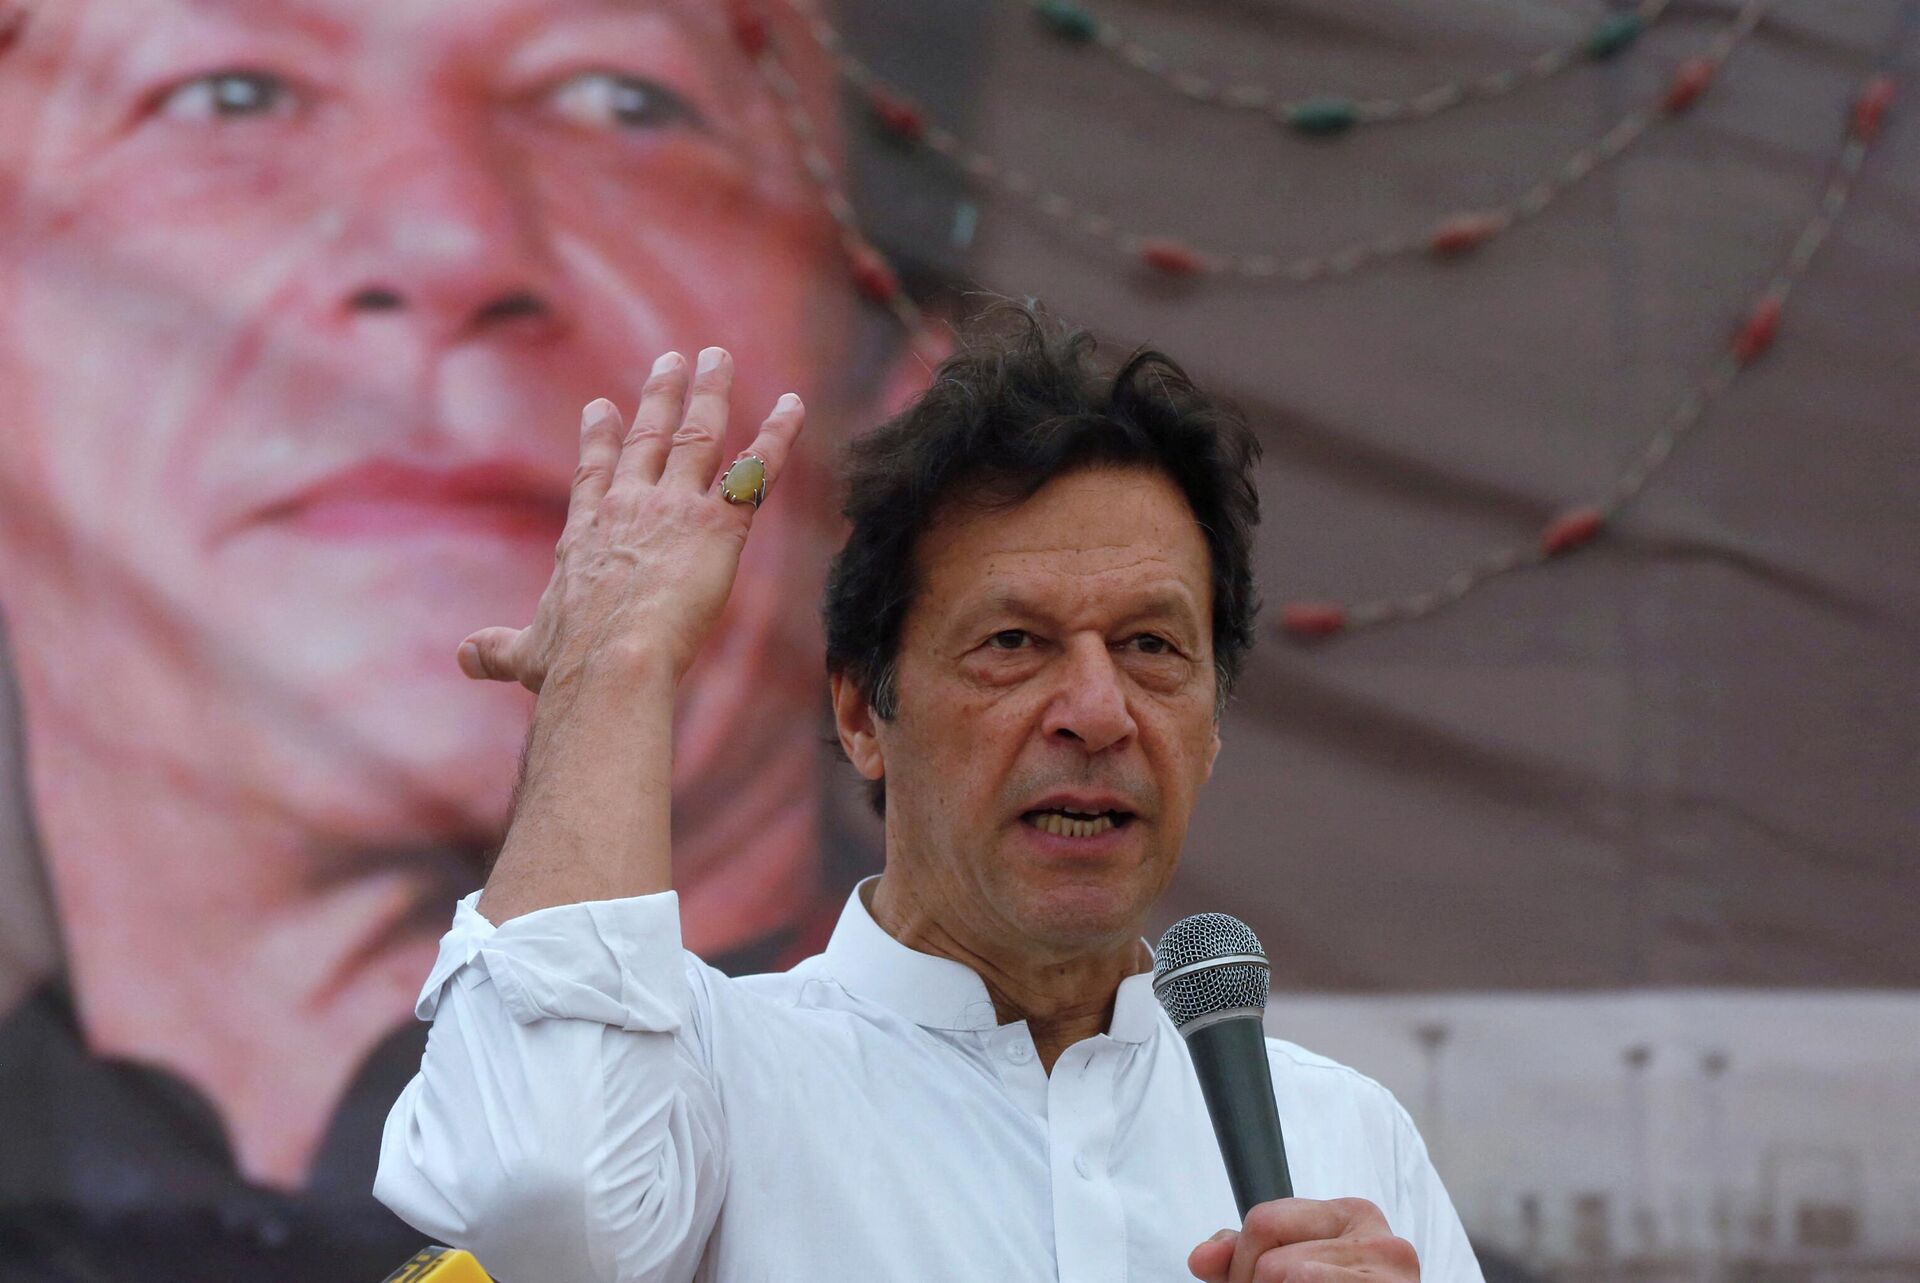 FILE PHOTO: Imran Khan, chairman of the Pakistan Tehreek-e-Insaf (PTI), gestures while addressing his supporters during a campaign meeting ahead of general elections in Karachi, Pakistan, July 4, 2018.  - Sputnik International, 1920, 20.04.2022